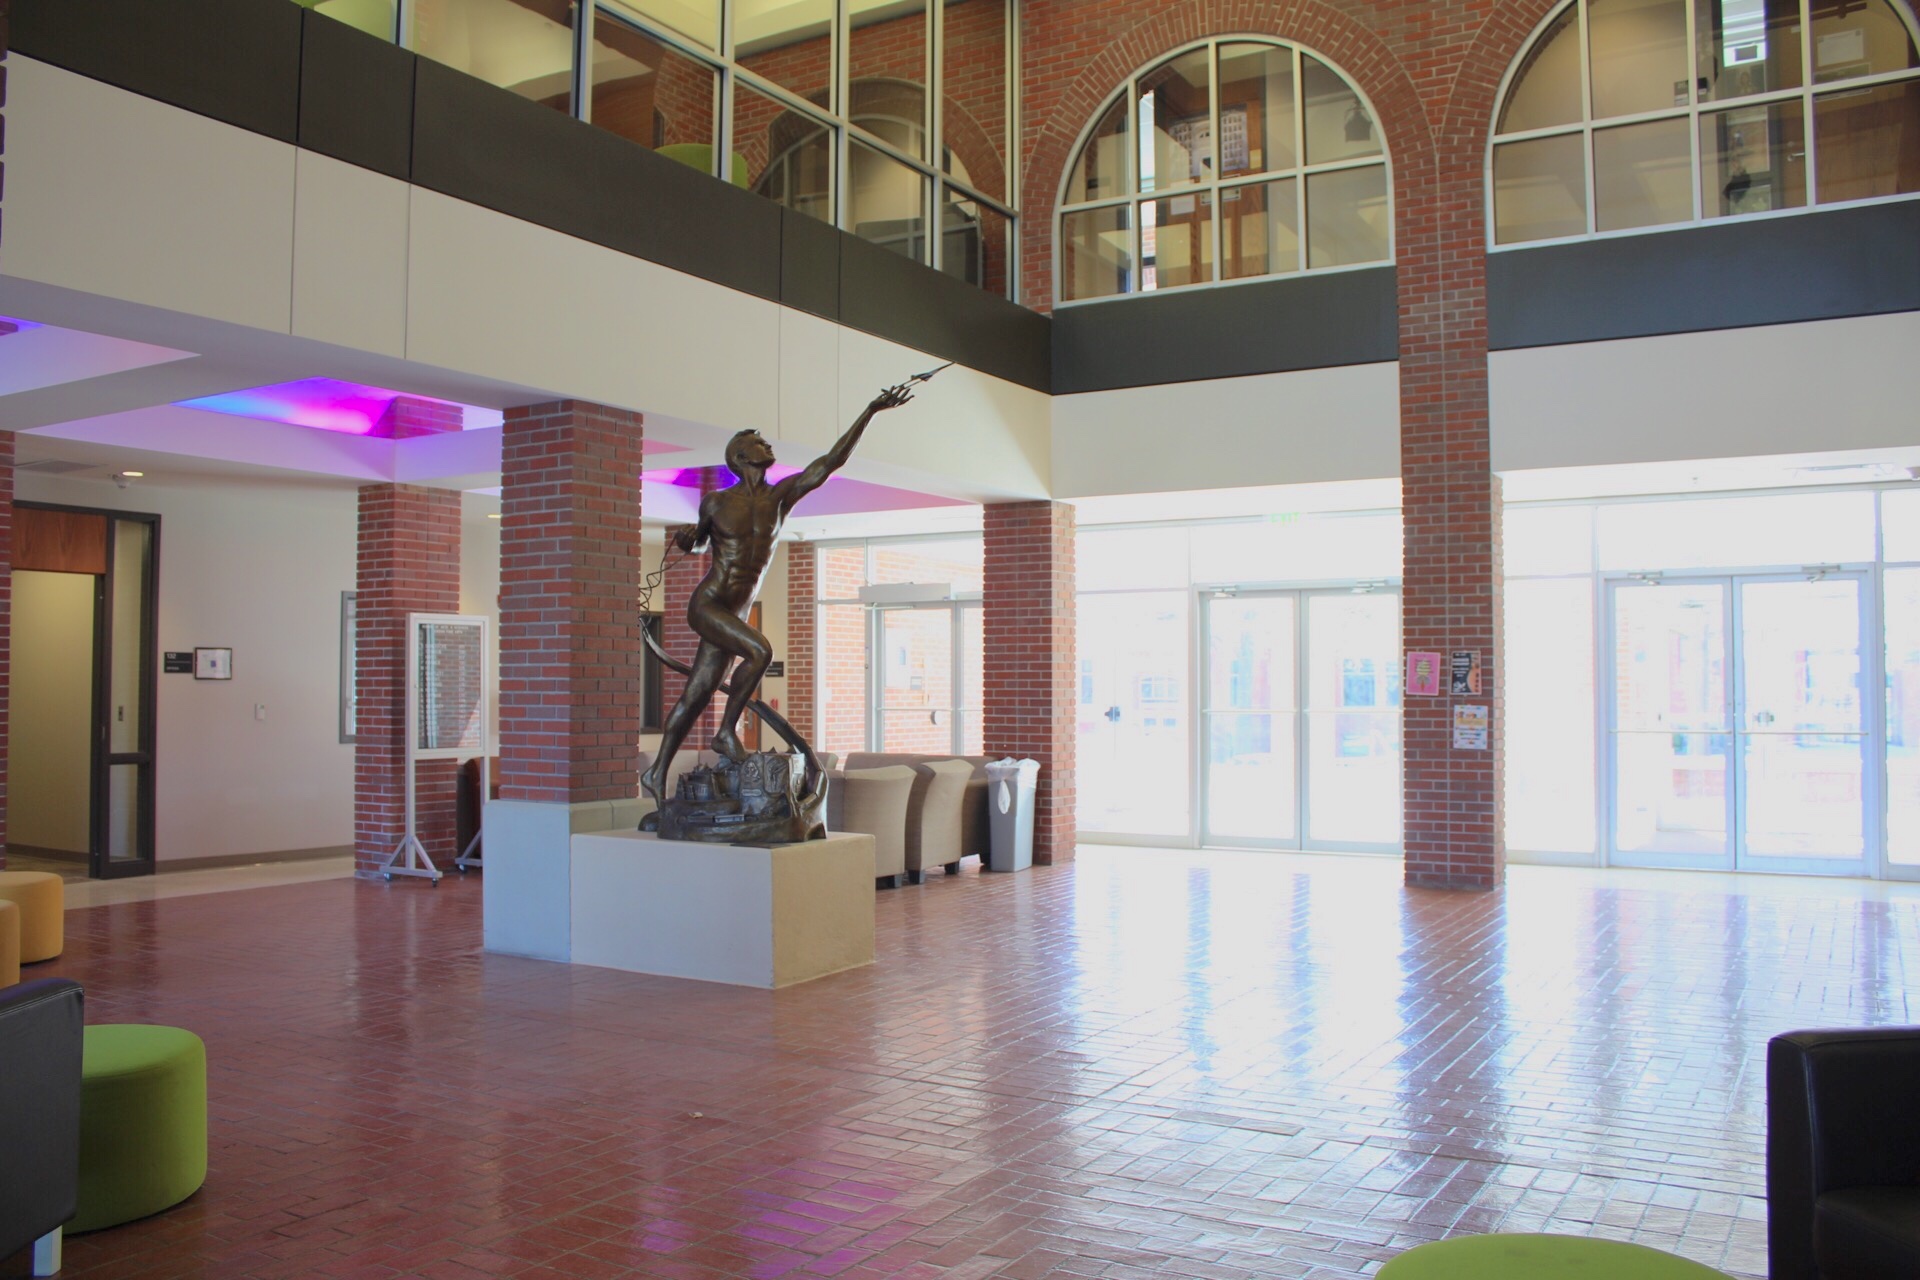 Jindra Lobby with brick floor and pillars, The Power of Thought sculpture and seating areas